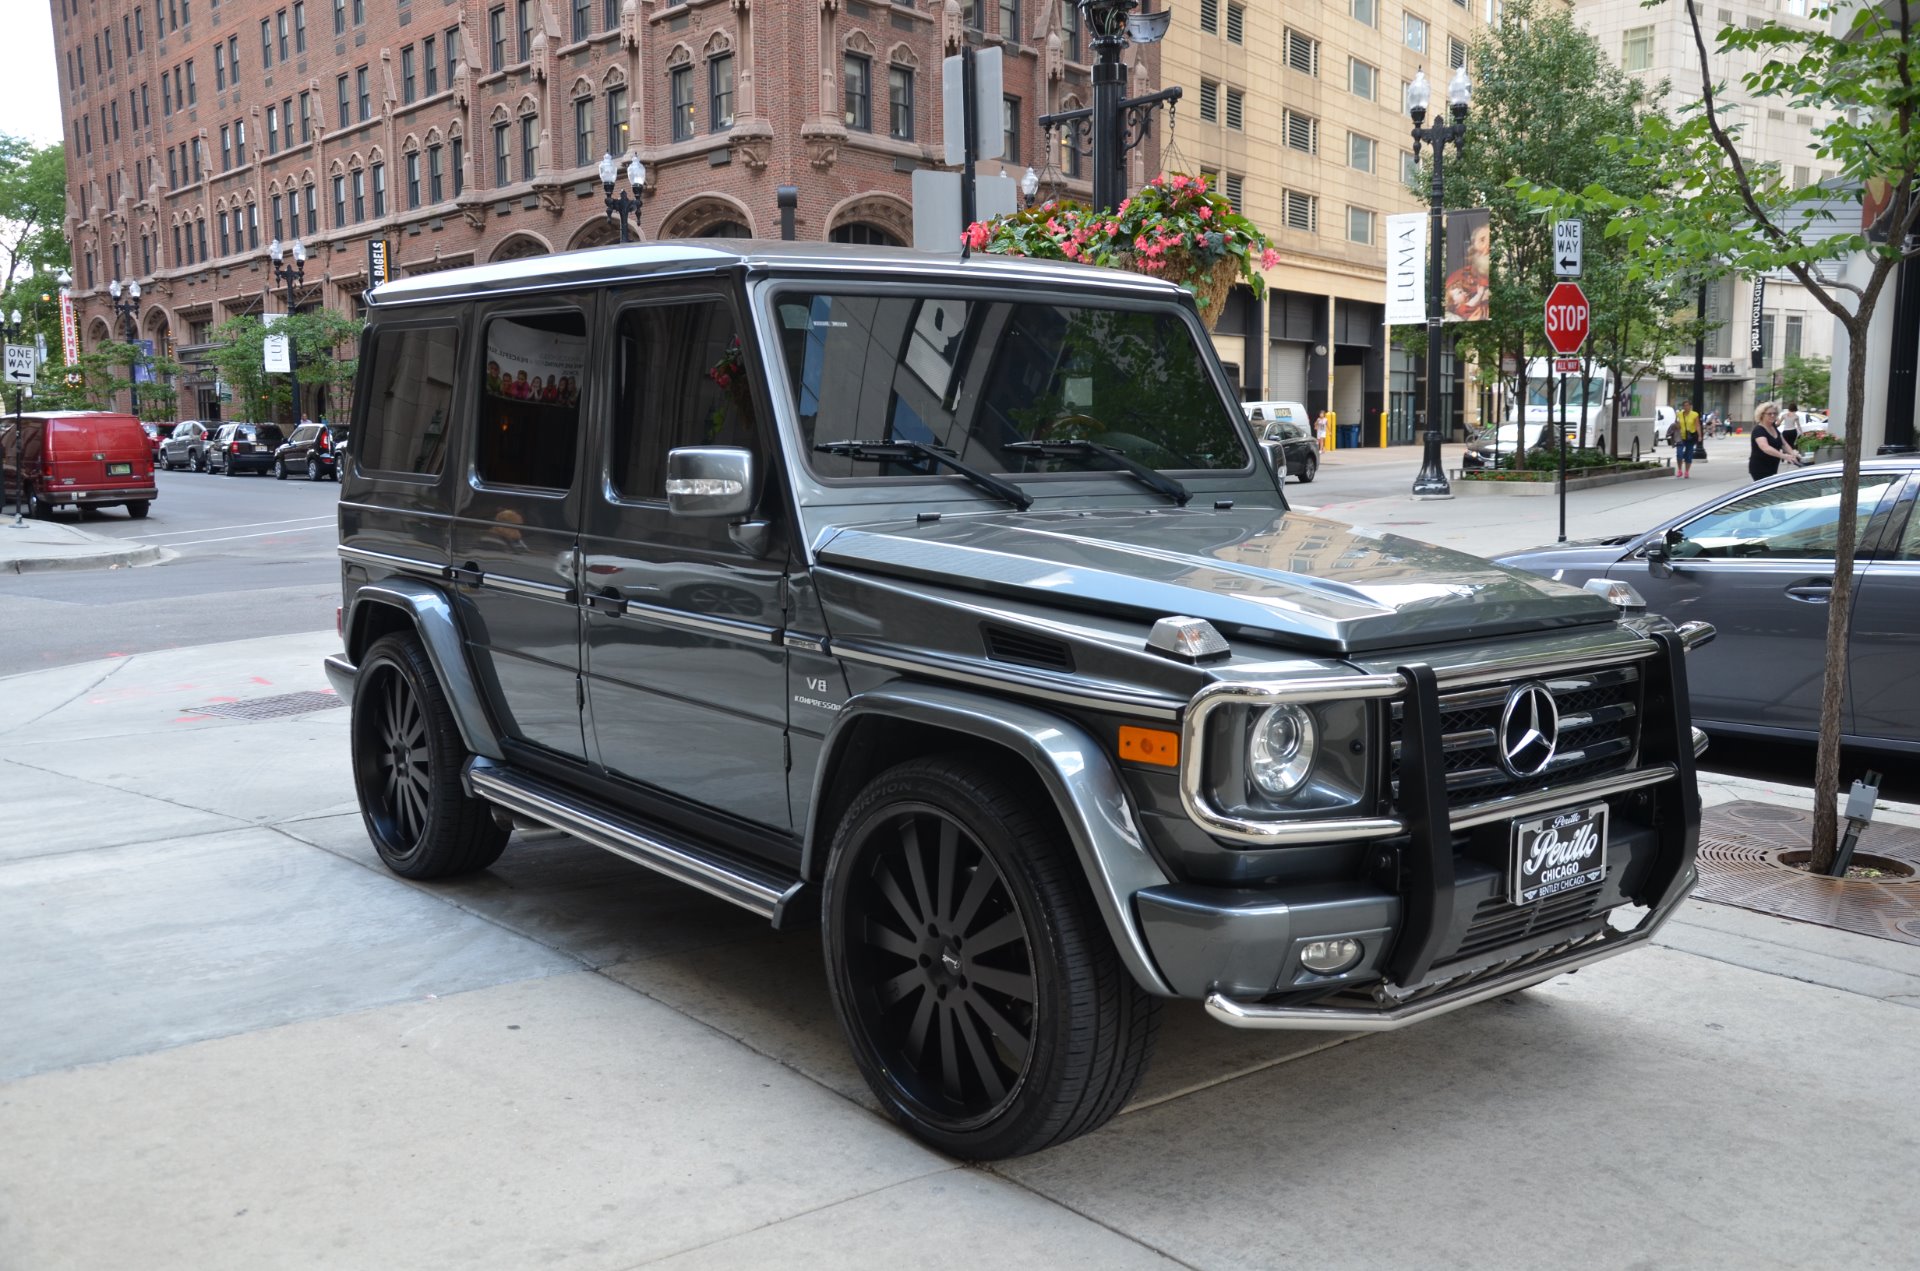 2011 Mercedes-Benz G-Class G55 AMG Stock # GC1616AB for sale near Chicago, IL | IL Mercedes-Benz ...